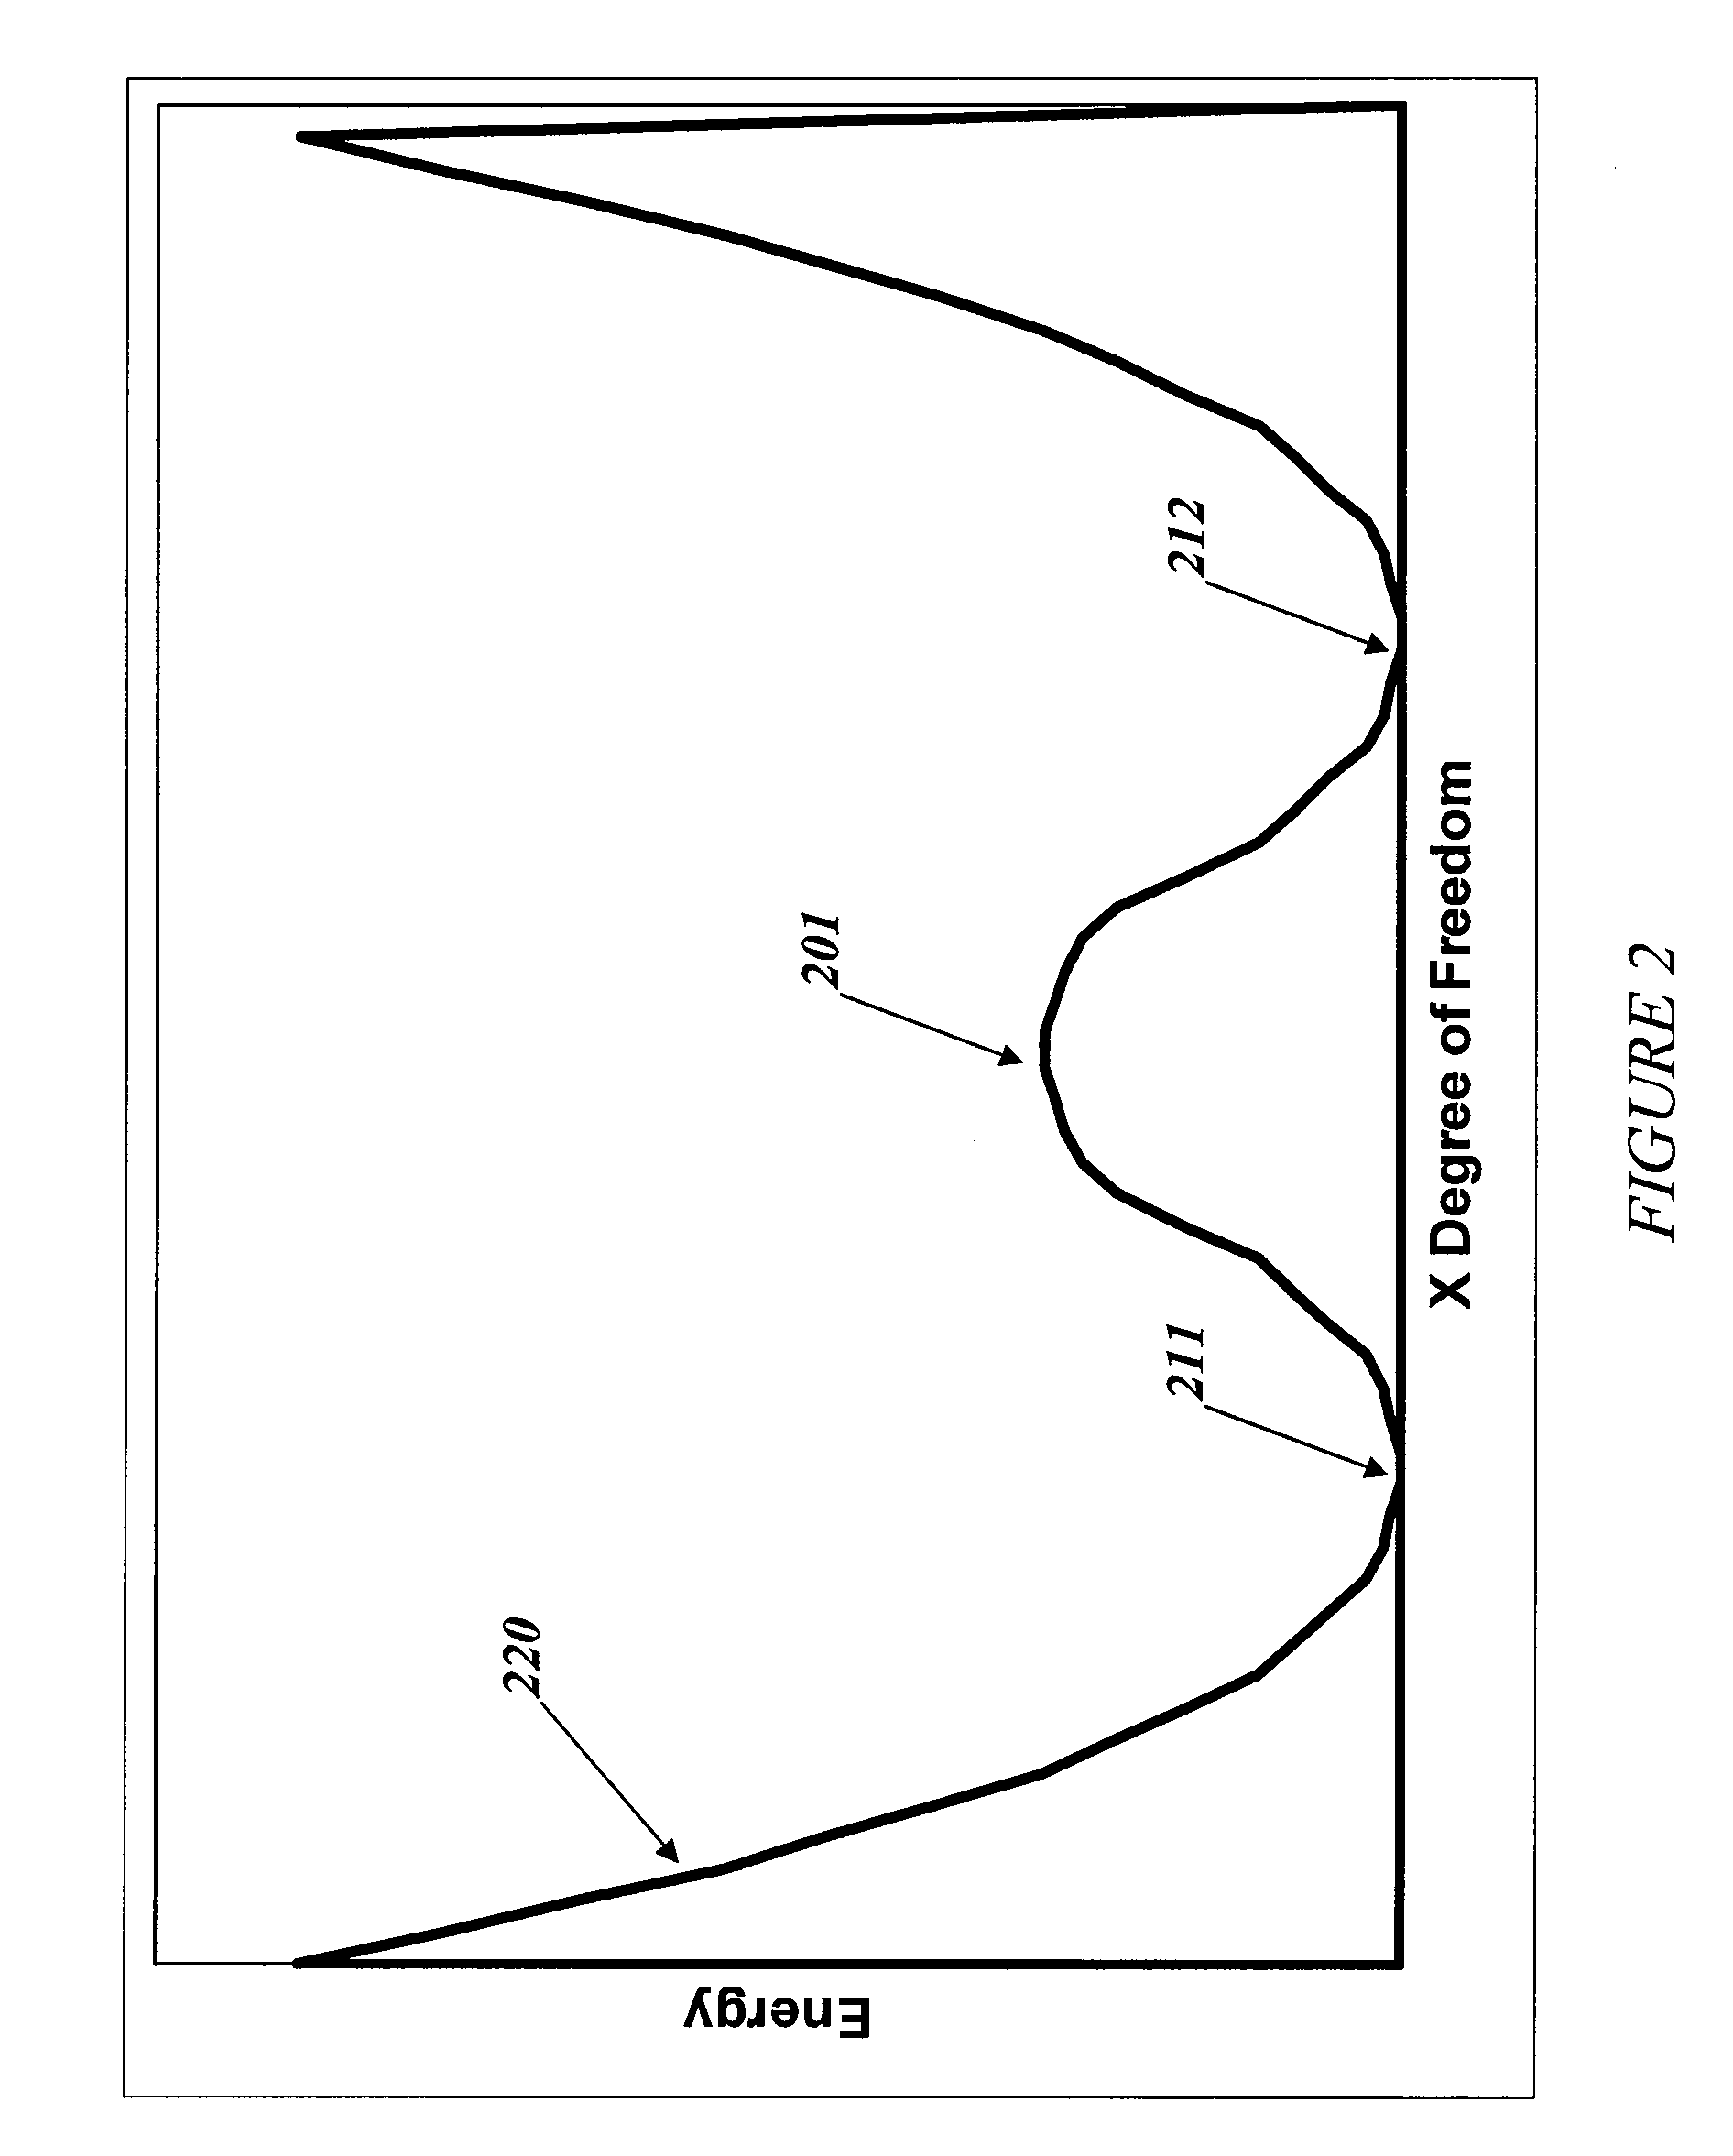 Systems, methods, and apparatus for qubit state readout